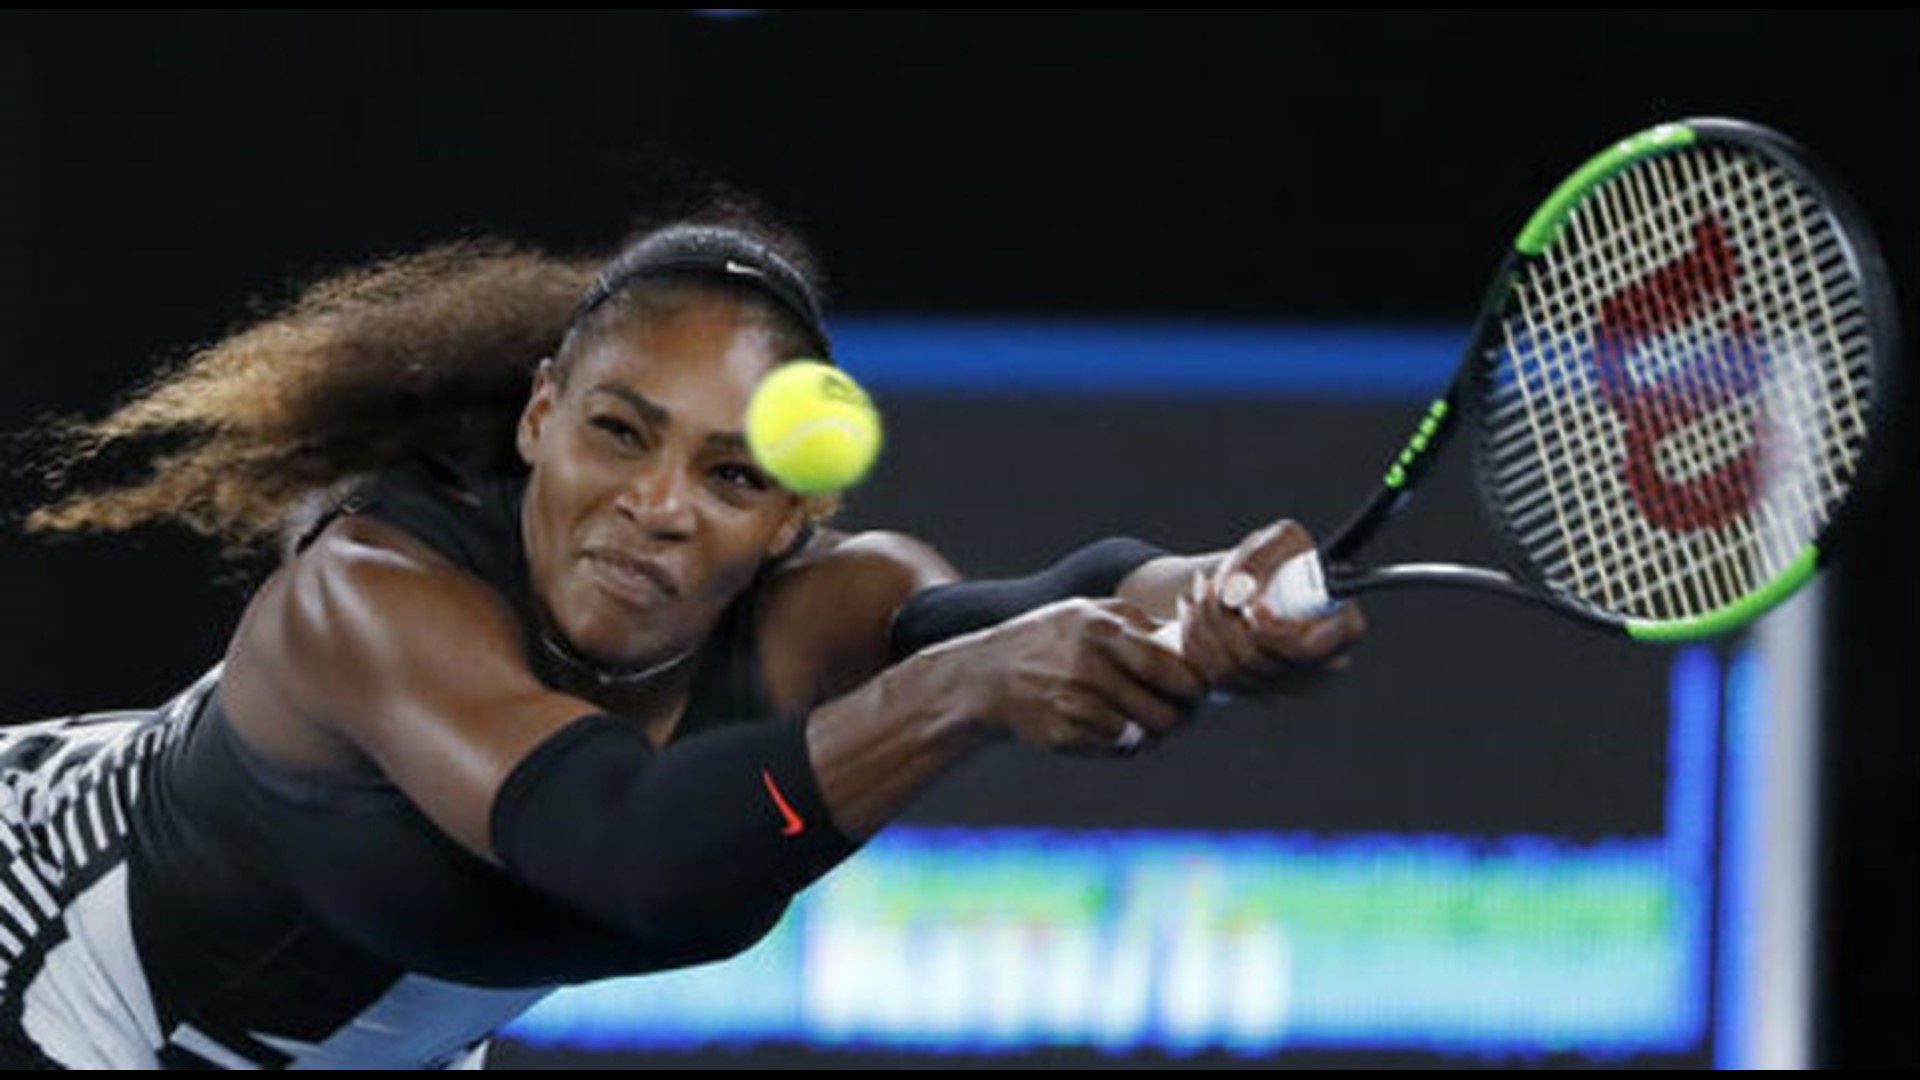 Serena Williams to play 1st competition since giving birth | 10tv.com